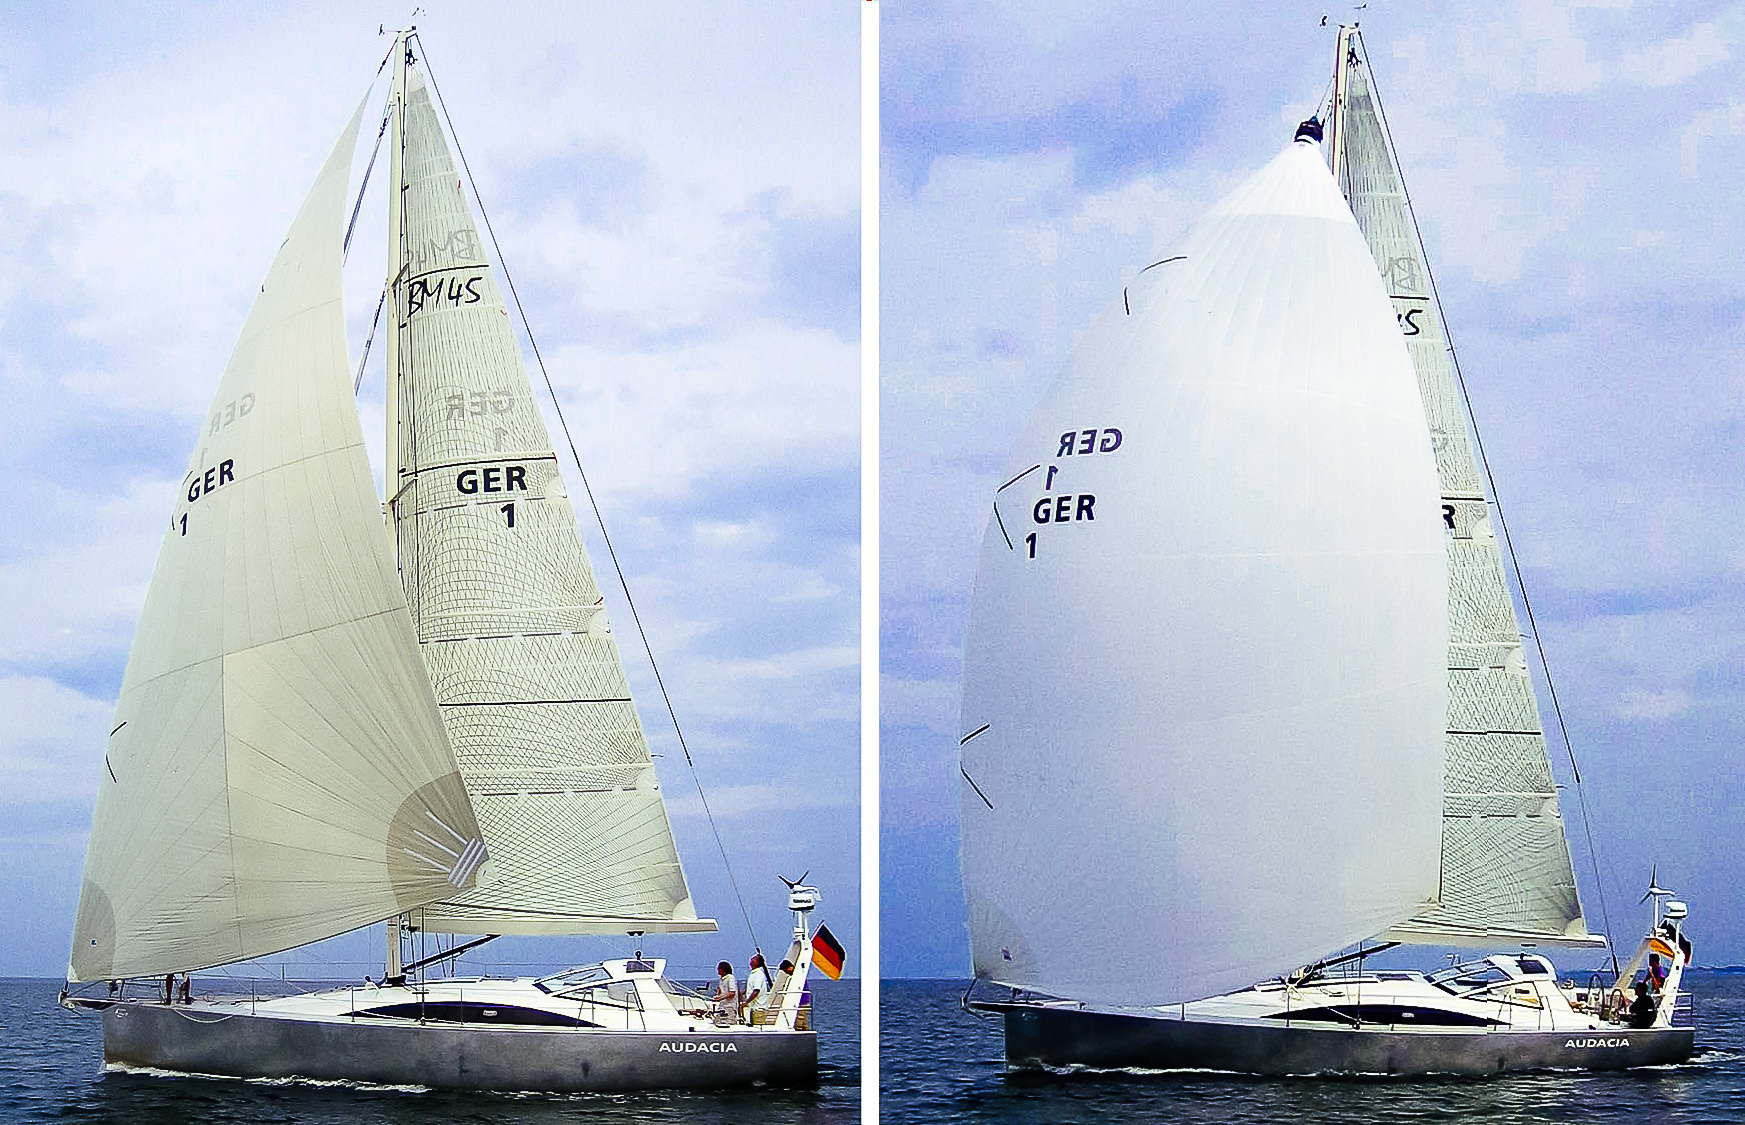 Shown above is a Berckemeyer 45 with a Cruising Code Zero (left) and a Cruising Spinnaker (right). Notice how the Code Zero is a much flatter "triangular" shaped sail that is designed for close reaching. The Cruising Spinnaker is bigger and rounder …